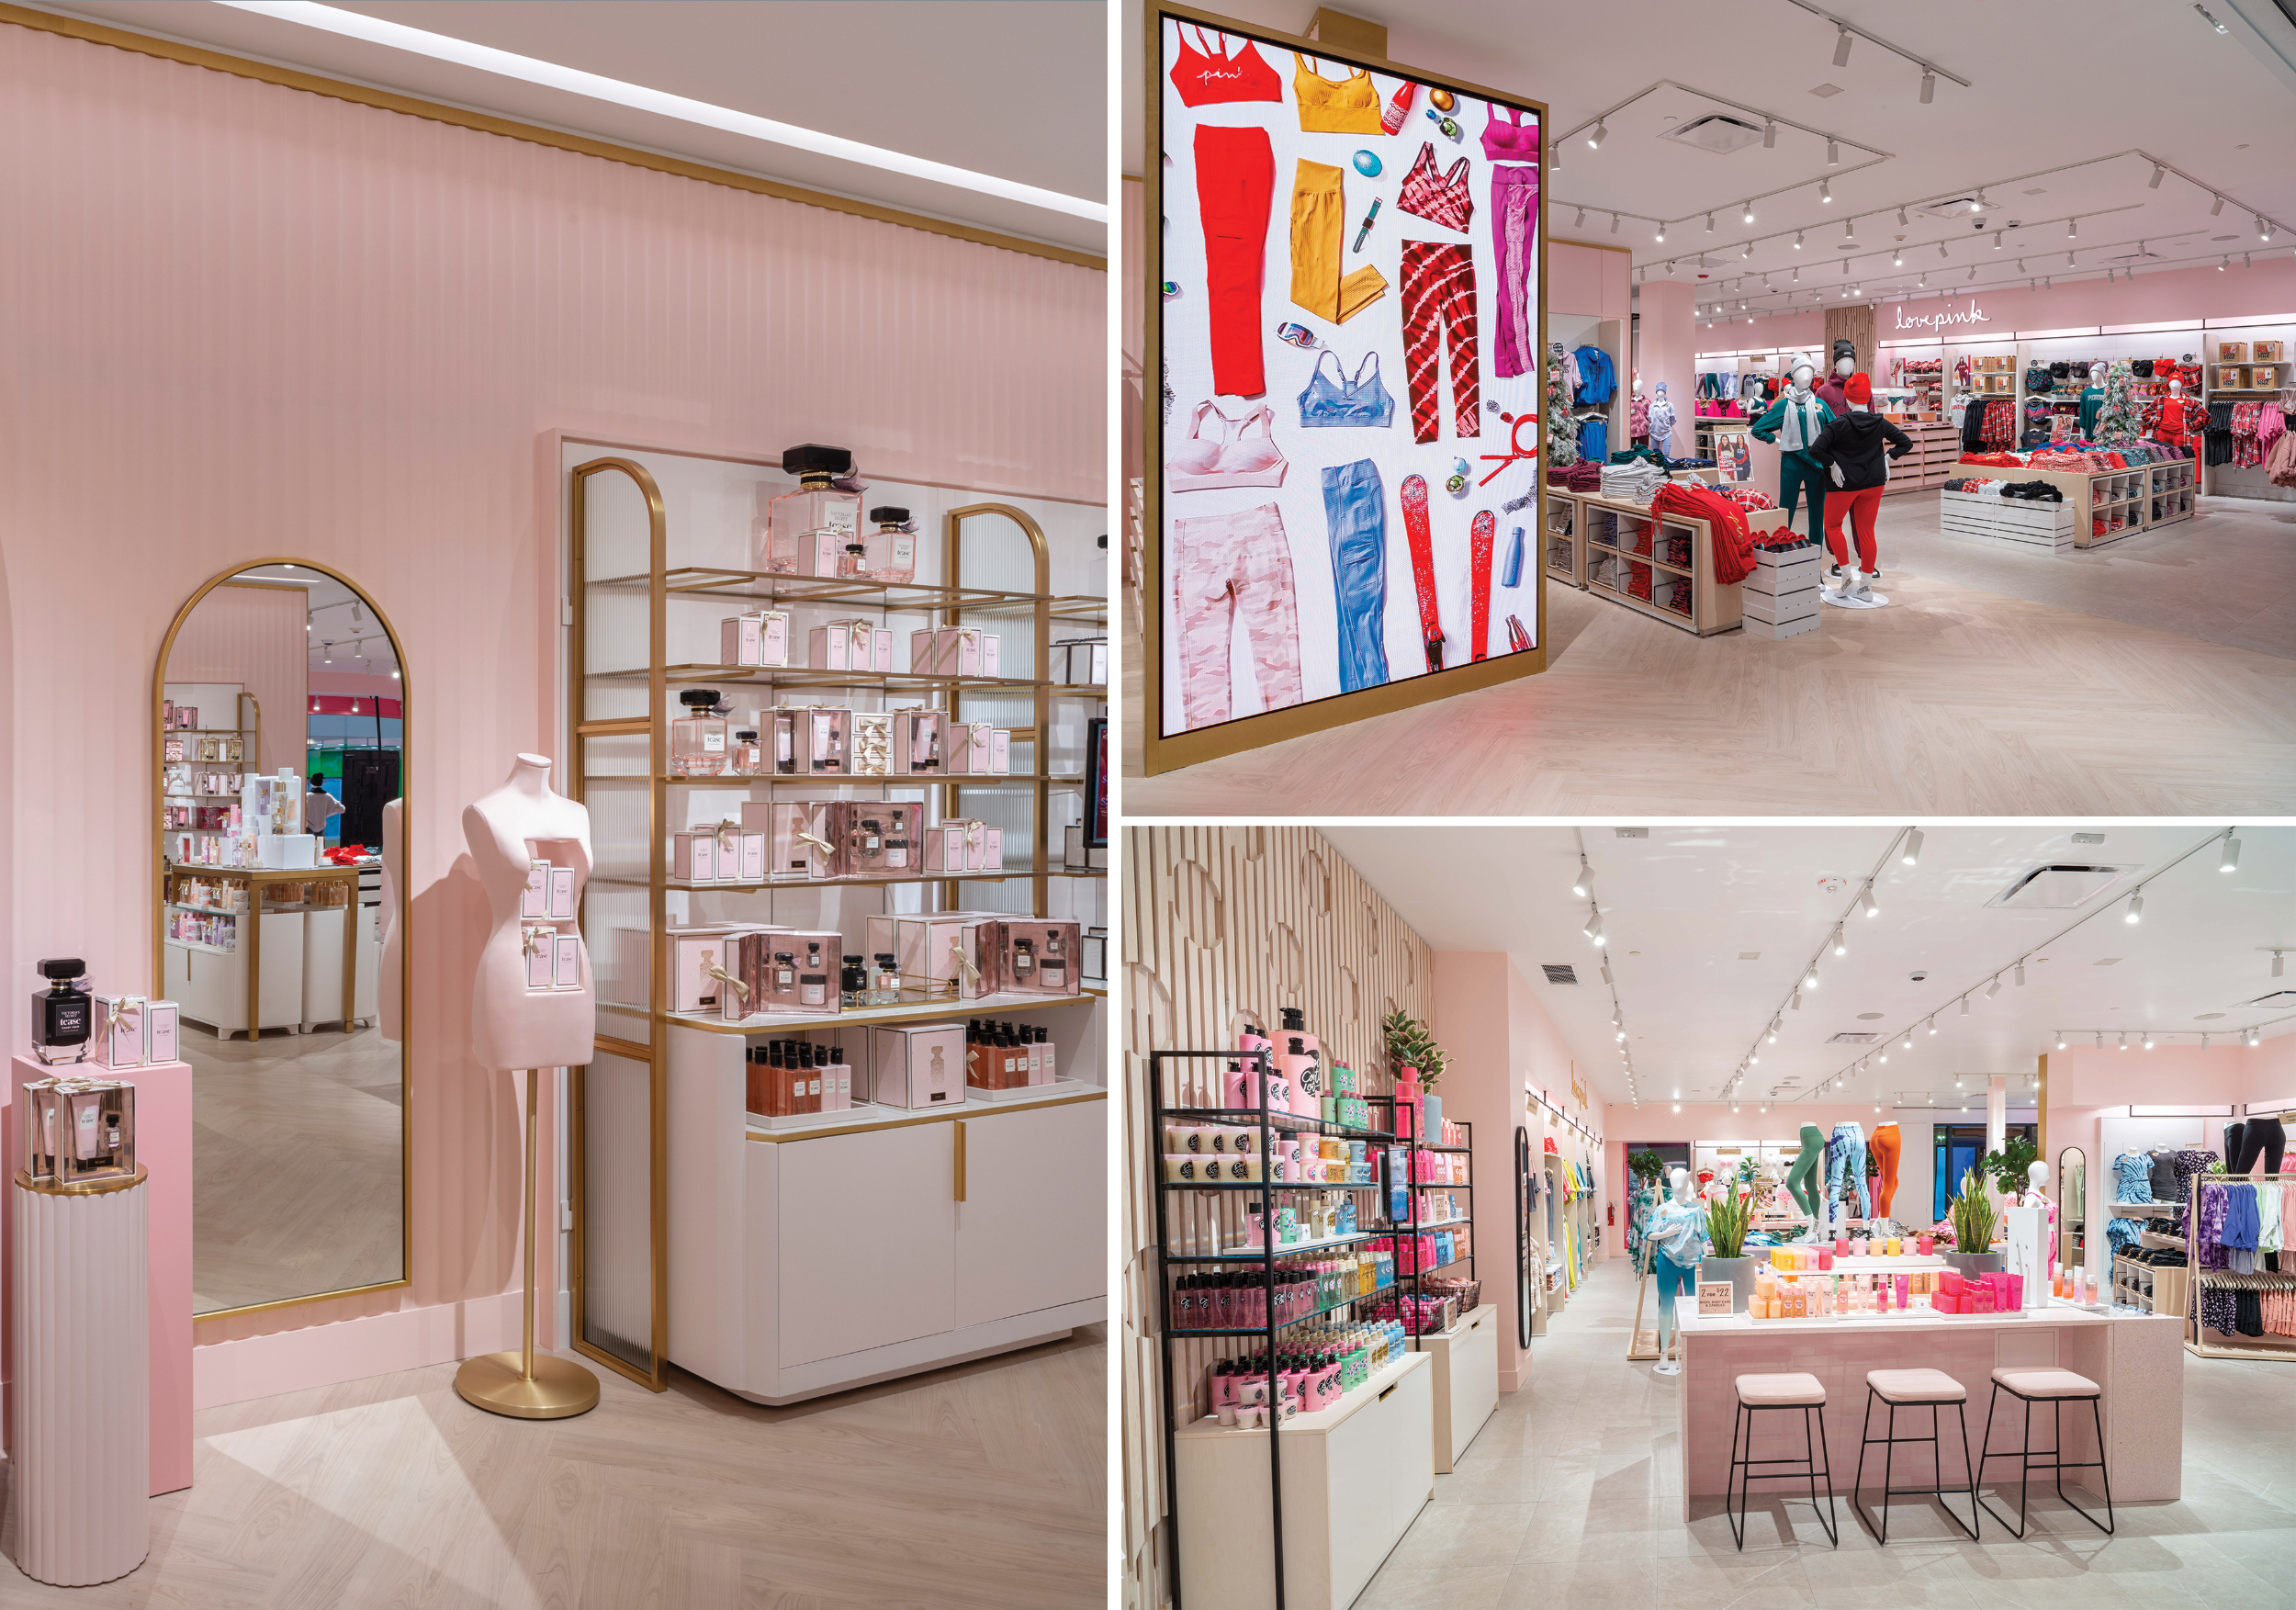 Victoria’s Secret recently opened additional Store of the Future locations in Birmingham, Ala. (shown directly above) and Houston. Much like the Chicago locale, the stores feature size-inclusive mannequins, gender-neutral apparel and digital touchpoints.